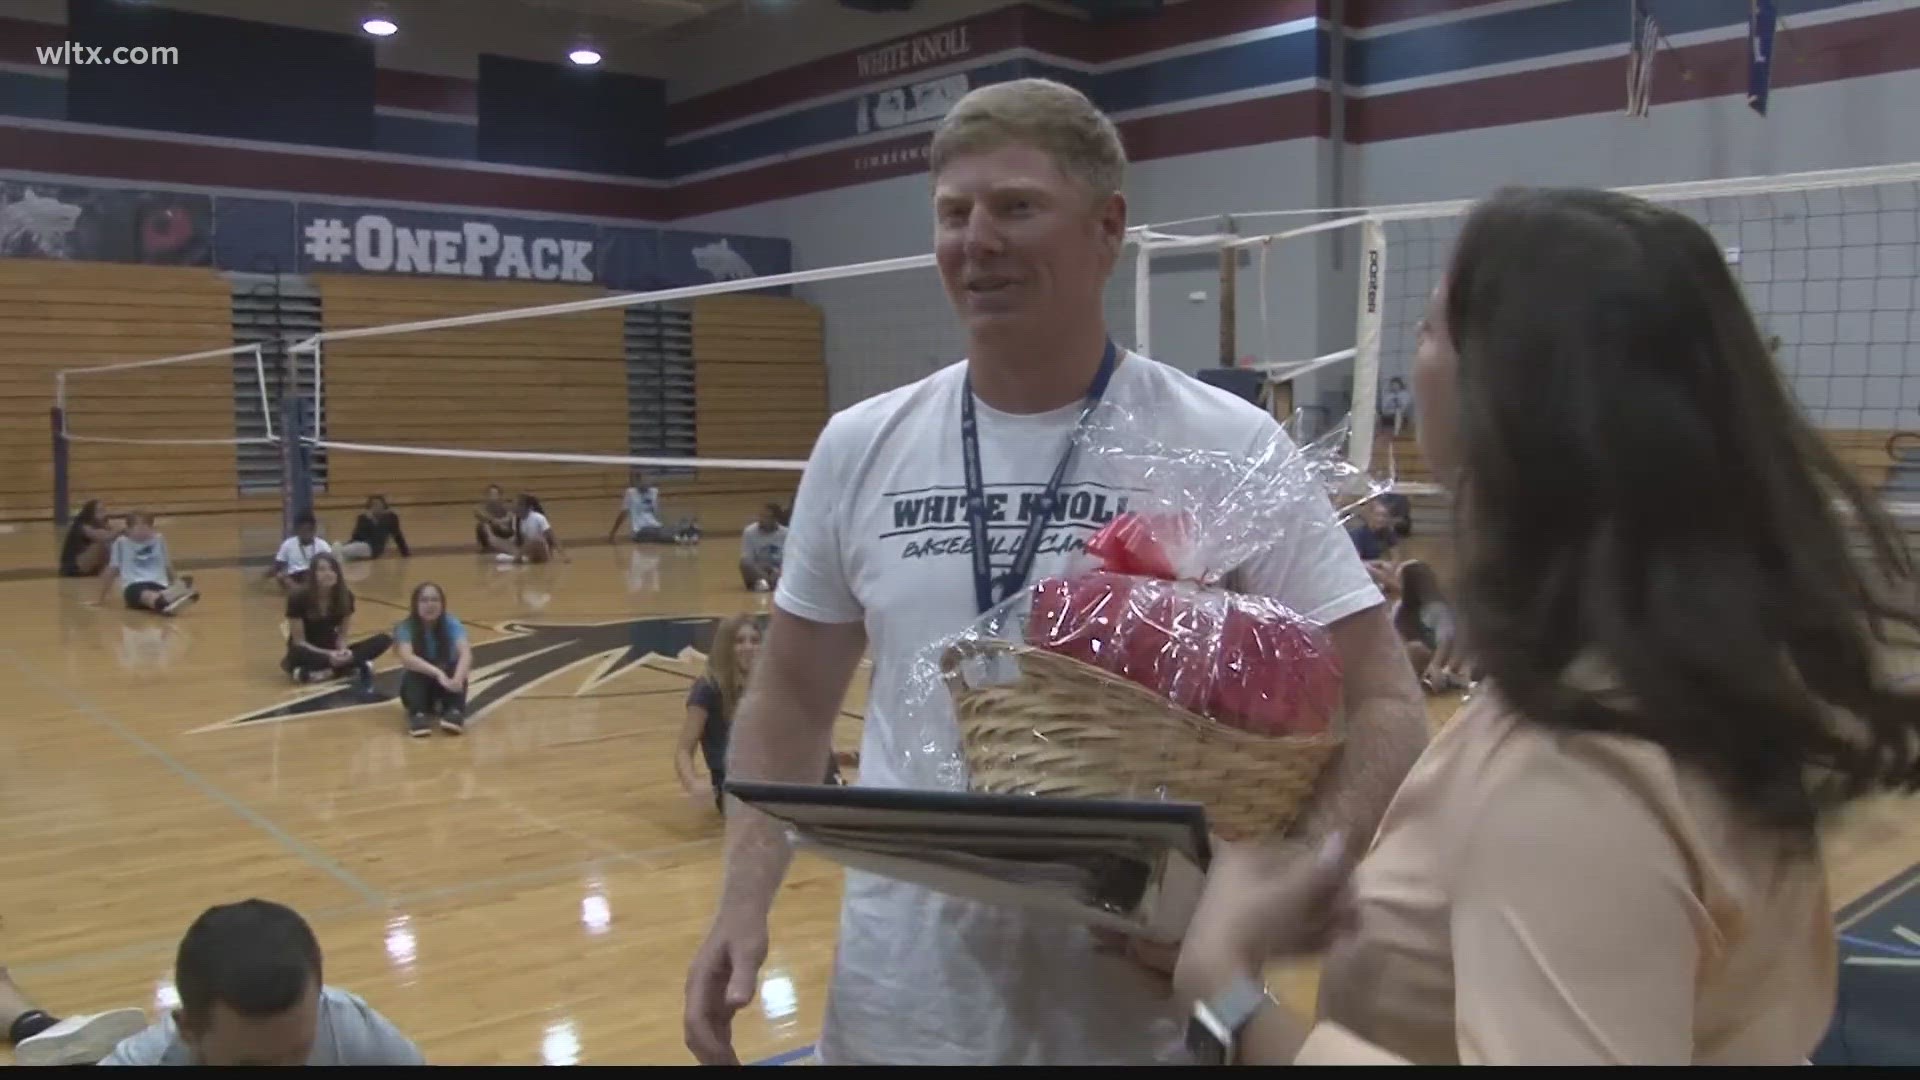 White Knoll High Schools Seth Cooper, students call Coach Cooper-he coaches the baseball team and is WLTX's teacher of the week.